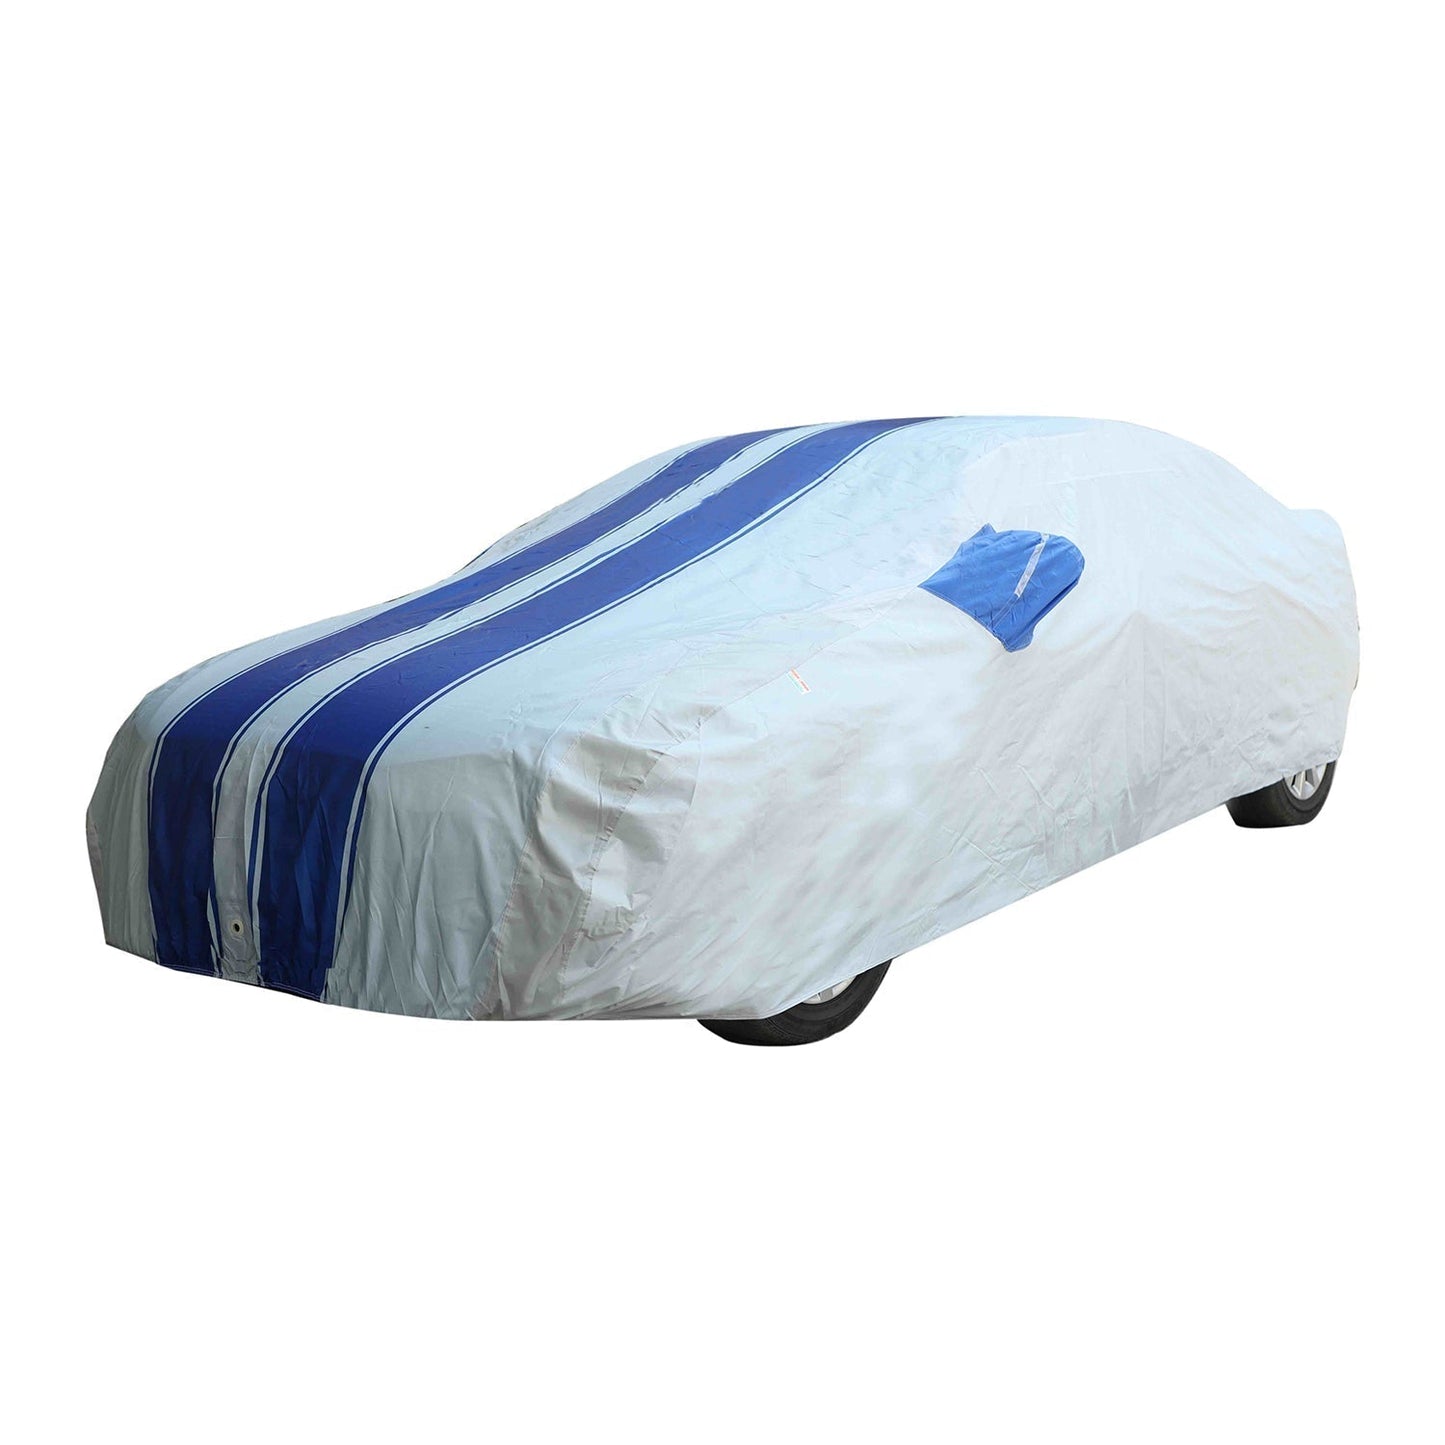 Oshotto 100% Blue dustproof and Water Resistant Car Body Cover with Mirror Pockets For BMW X6